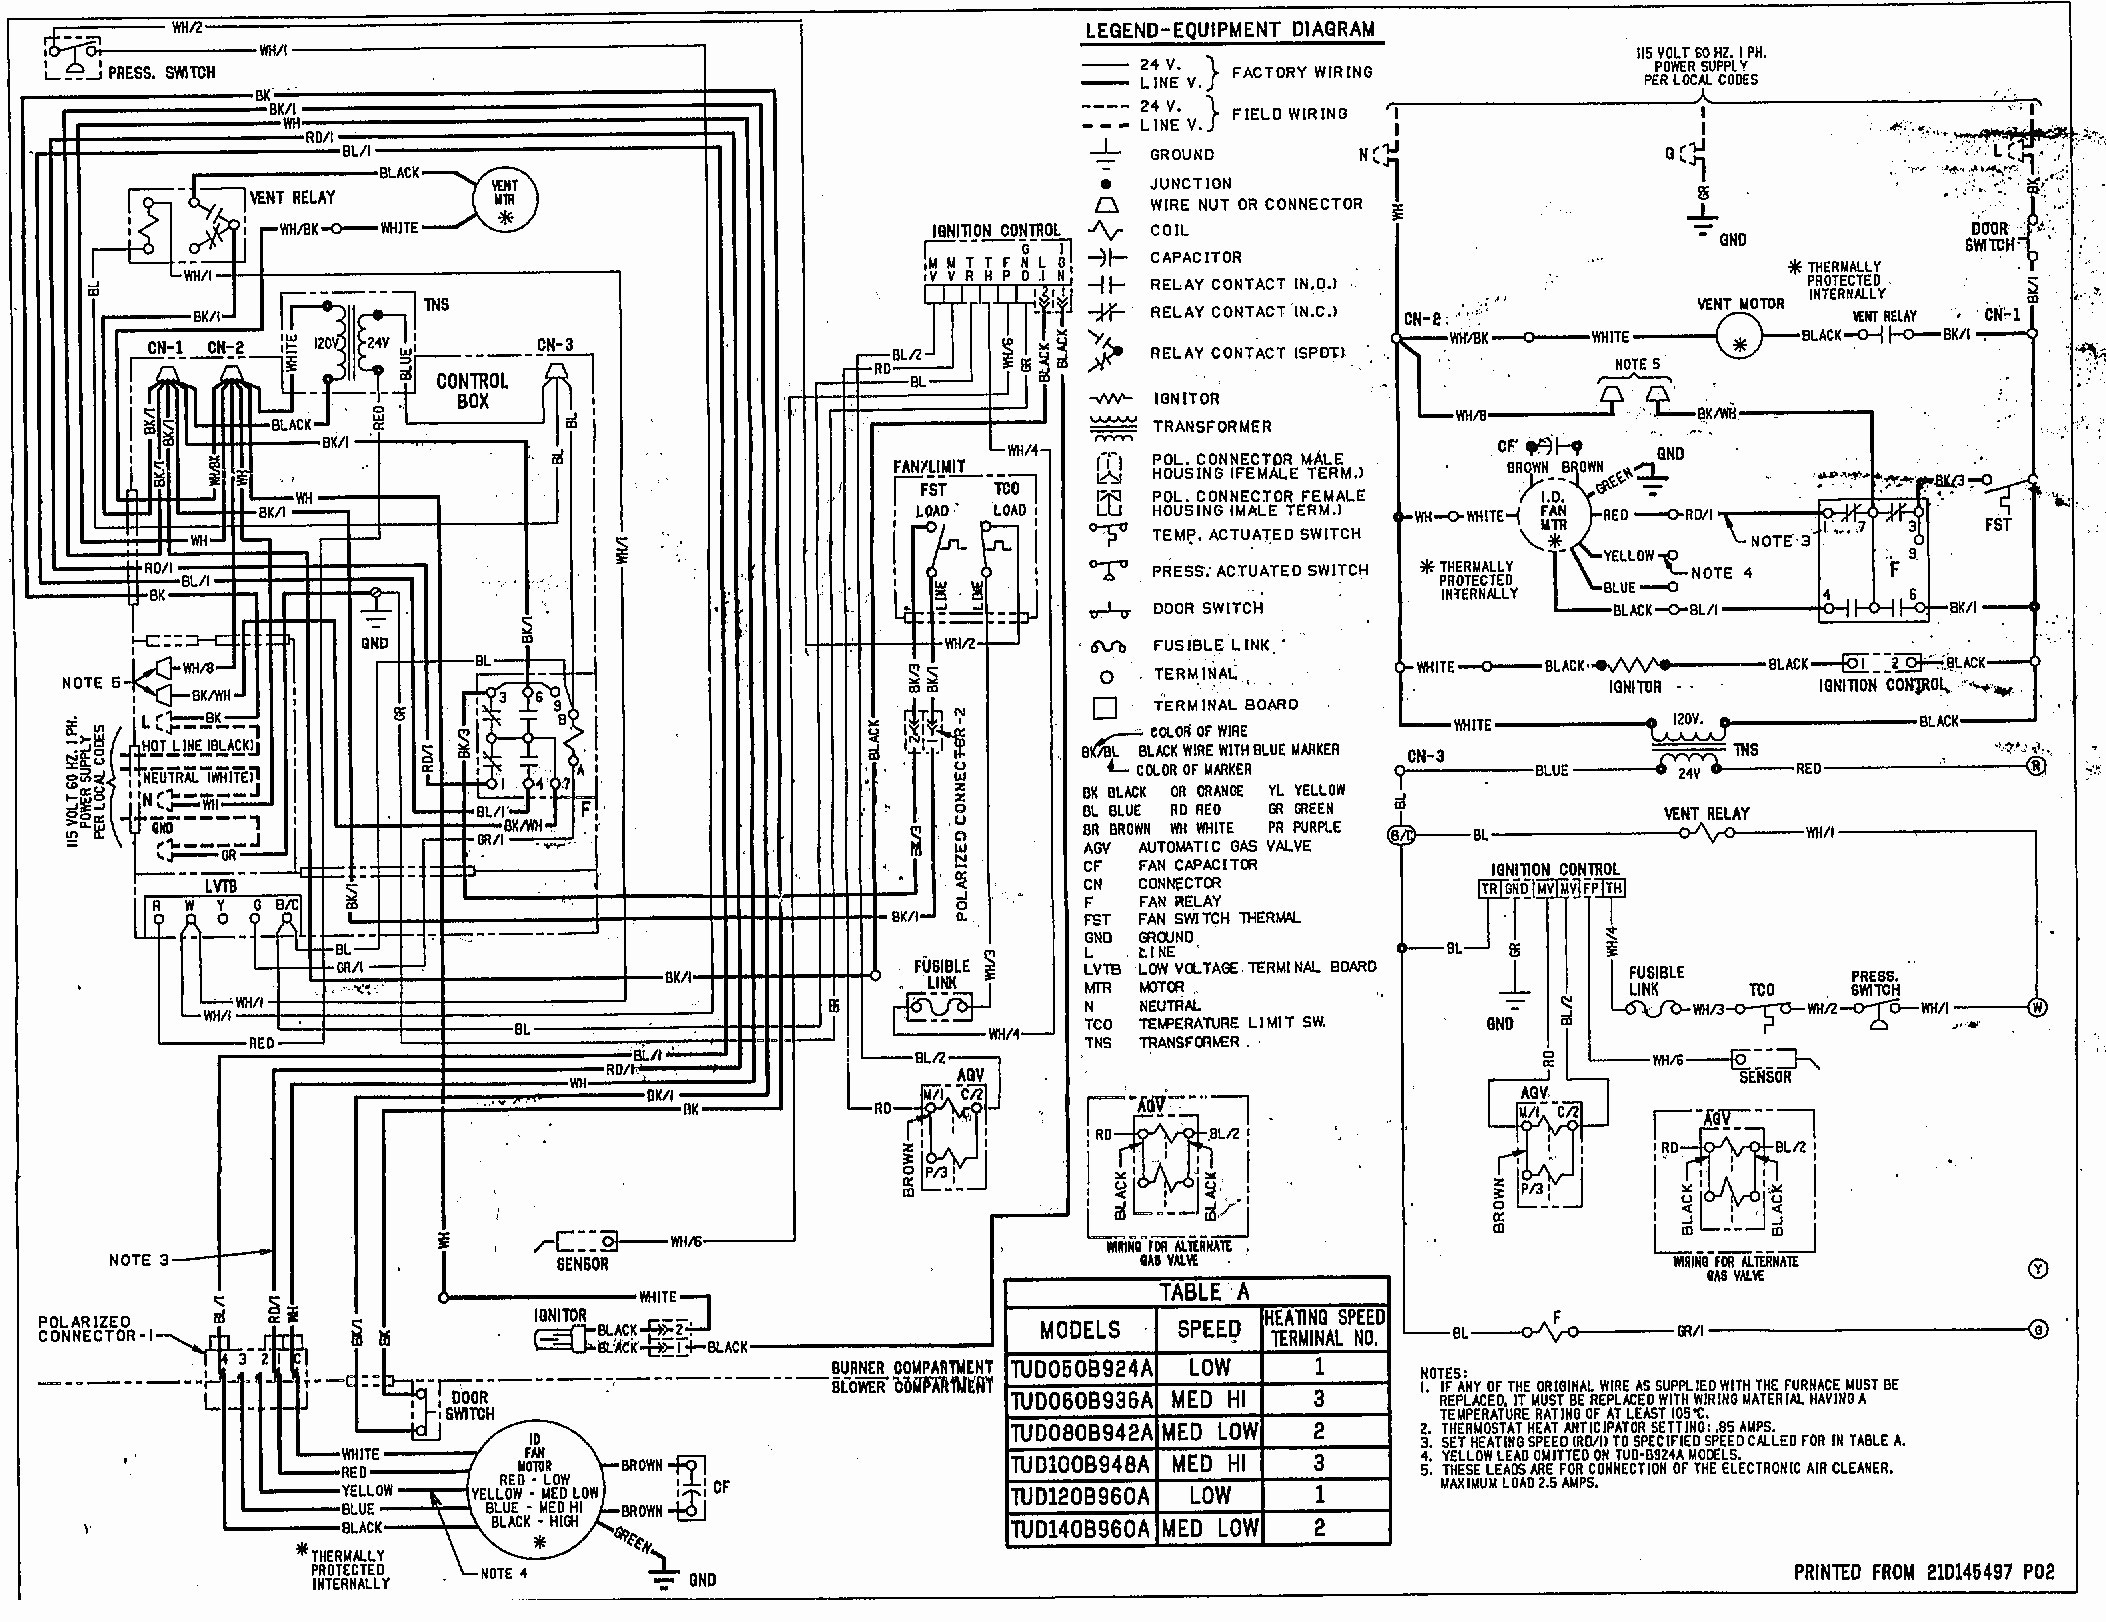 Wiring Diagram for Carrier Electric Furnace Valid Wiring Diagram Lennox Electric Furnace Wiring Diagram Unique Old